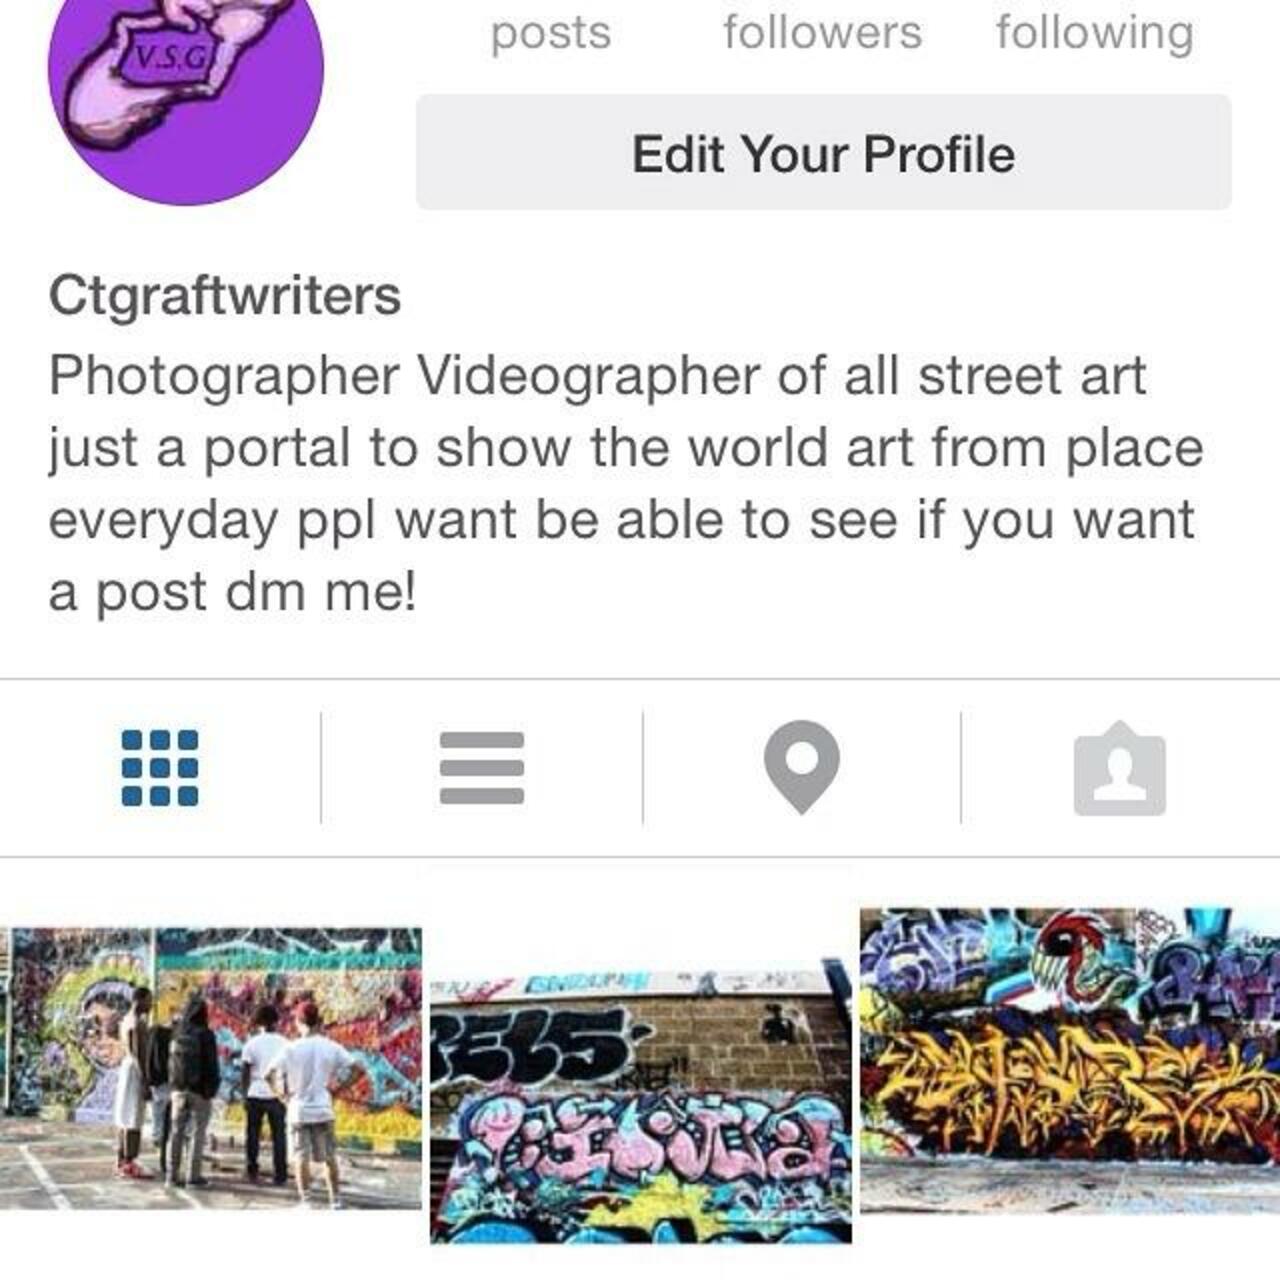 Follow my other Instagram #ctgraftwriters for a look at graffiti in the ct area #art #graffiti #graffwriter http://t.co/O1fjxX9Gmf